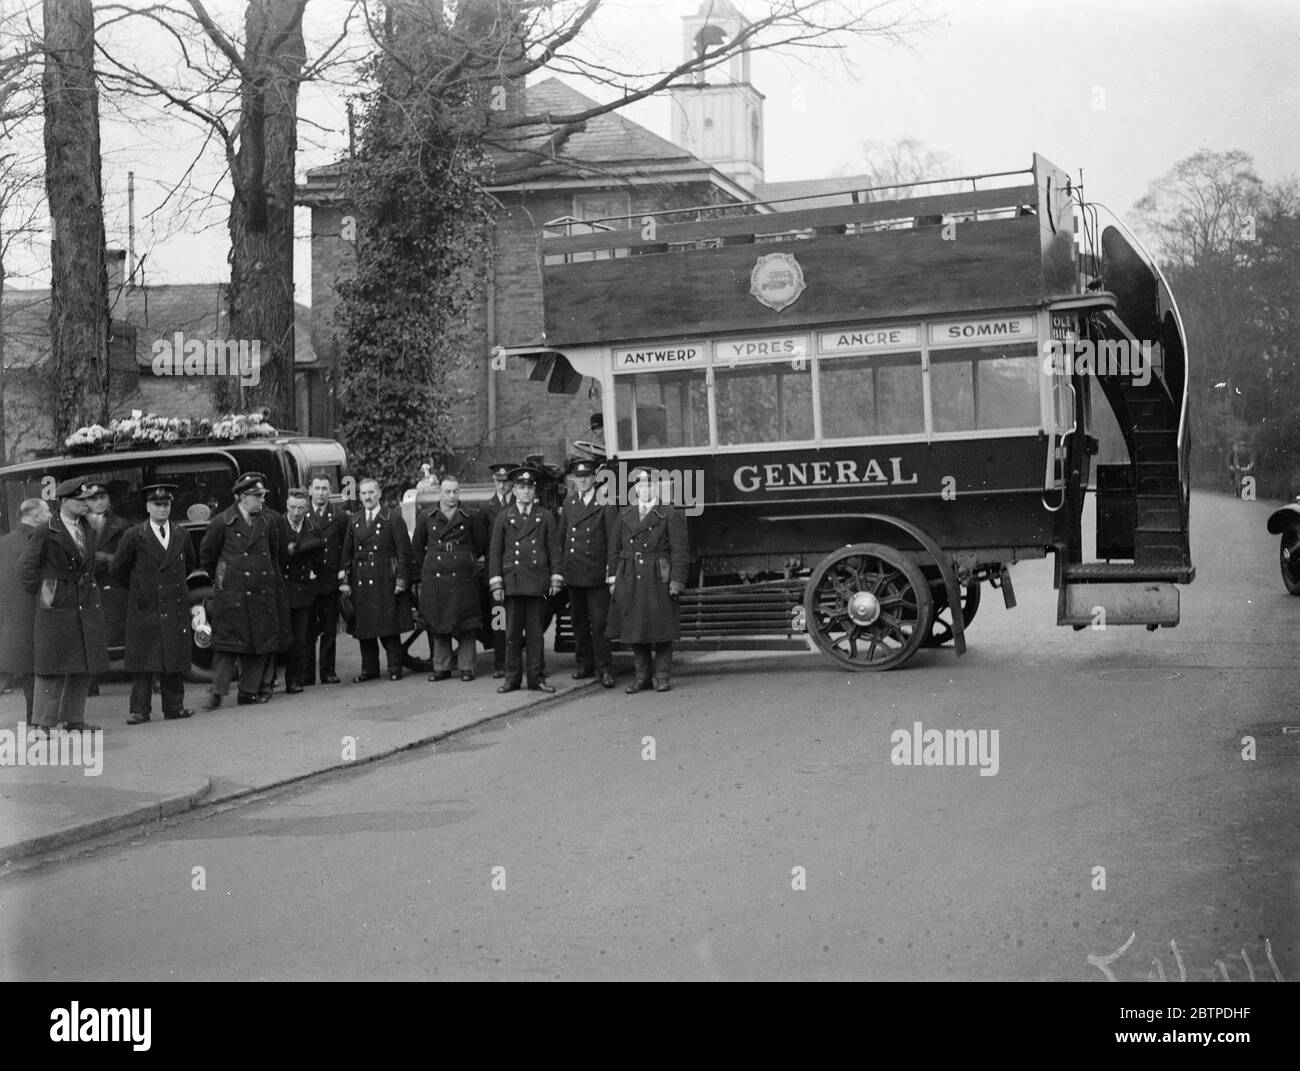 Old Bill , Bexley . 1935 LGOC Type B motor bus B43  Ole Bill  used by Britain to transport troops on the Western Front in World War I. Stock Photo